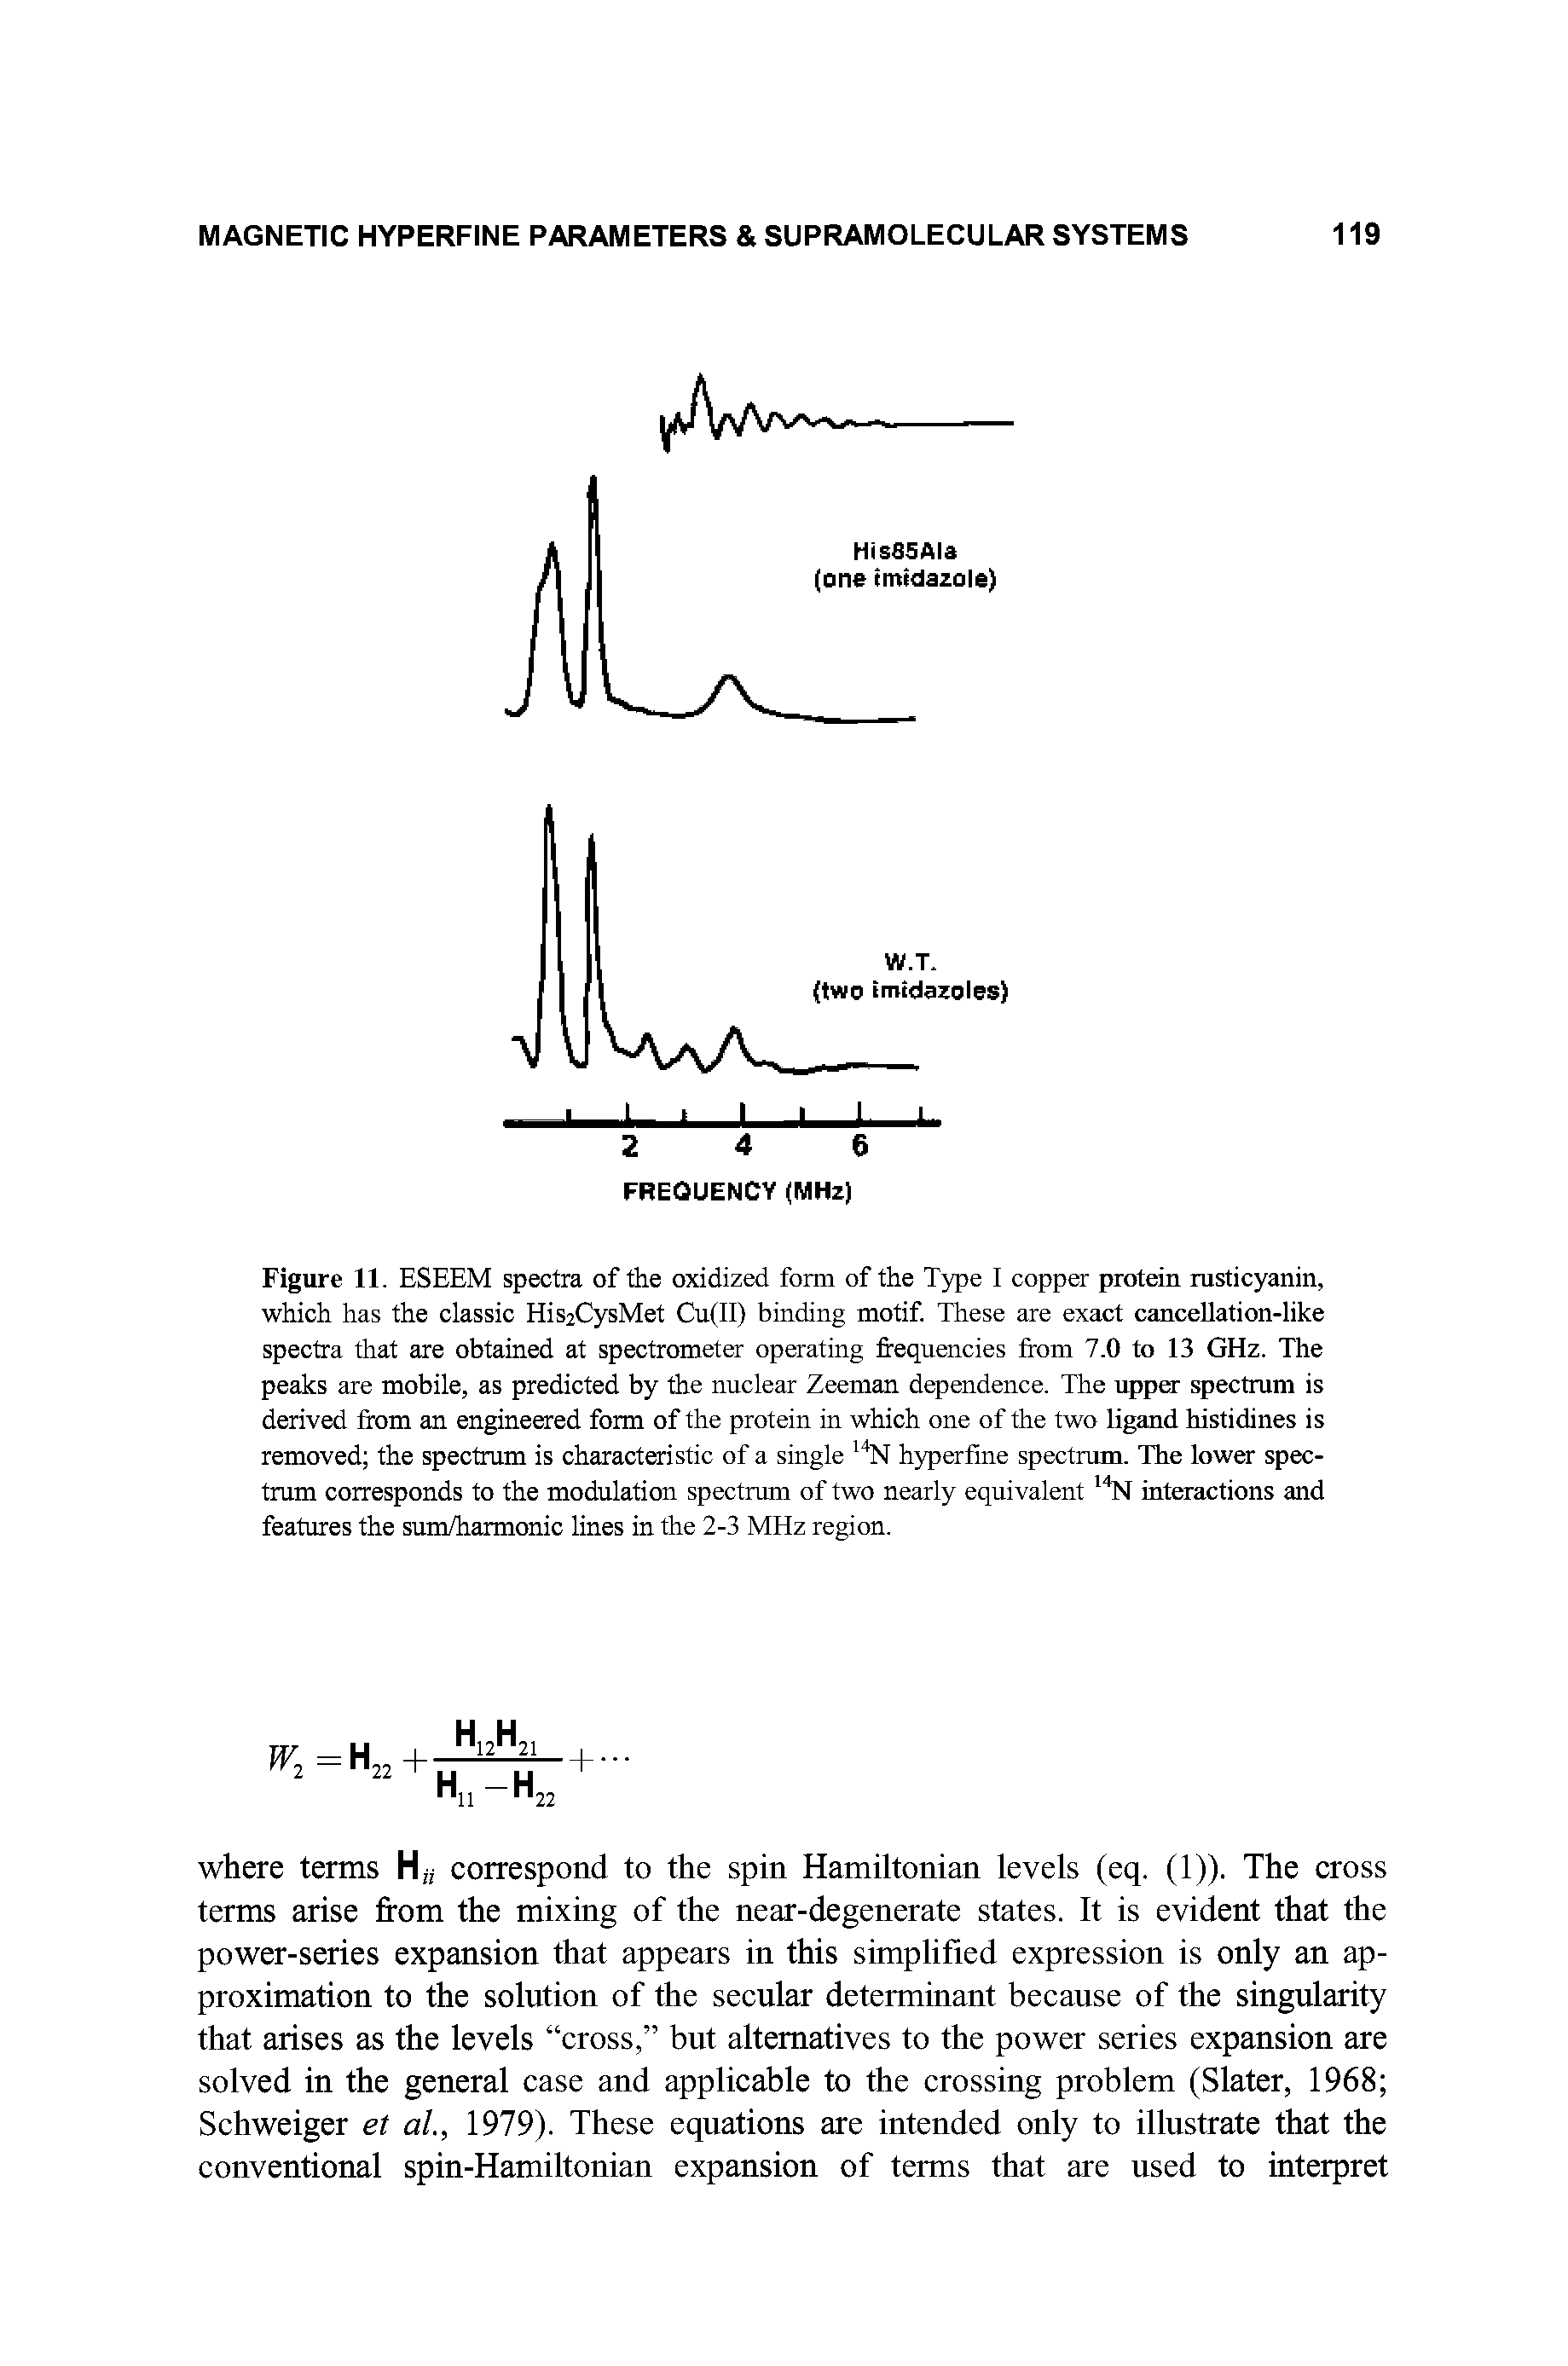 Figure 11. ESEEM spectra of the oxidized form of the Type I copper piotein msticyanin, which has the classic His2CysMet Cu(II) binding motif. These are exact cancellation-like spectra that are obtained at spectrometer operating frequencies from 7.0 to 13 GHz. The peaks are mobile, as predicted by the nuclear Zeeman dependence. The upper spectrum is derived from an engineered form of the protein in which one of the two ligand histidines is removed the spectrum is characteristic of a single hyperfine spectrum. The lower spectrum corresponds to the modulation spectrum of two nearly equivalent N interactions and features the sum/harmonic lines in the 2-3 MHz region.